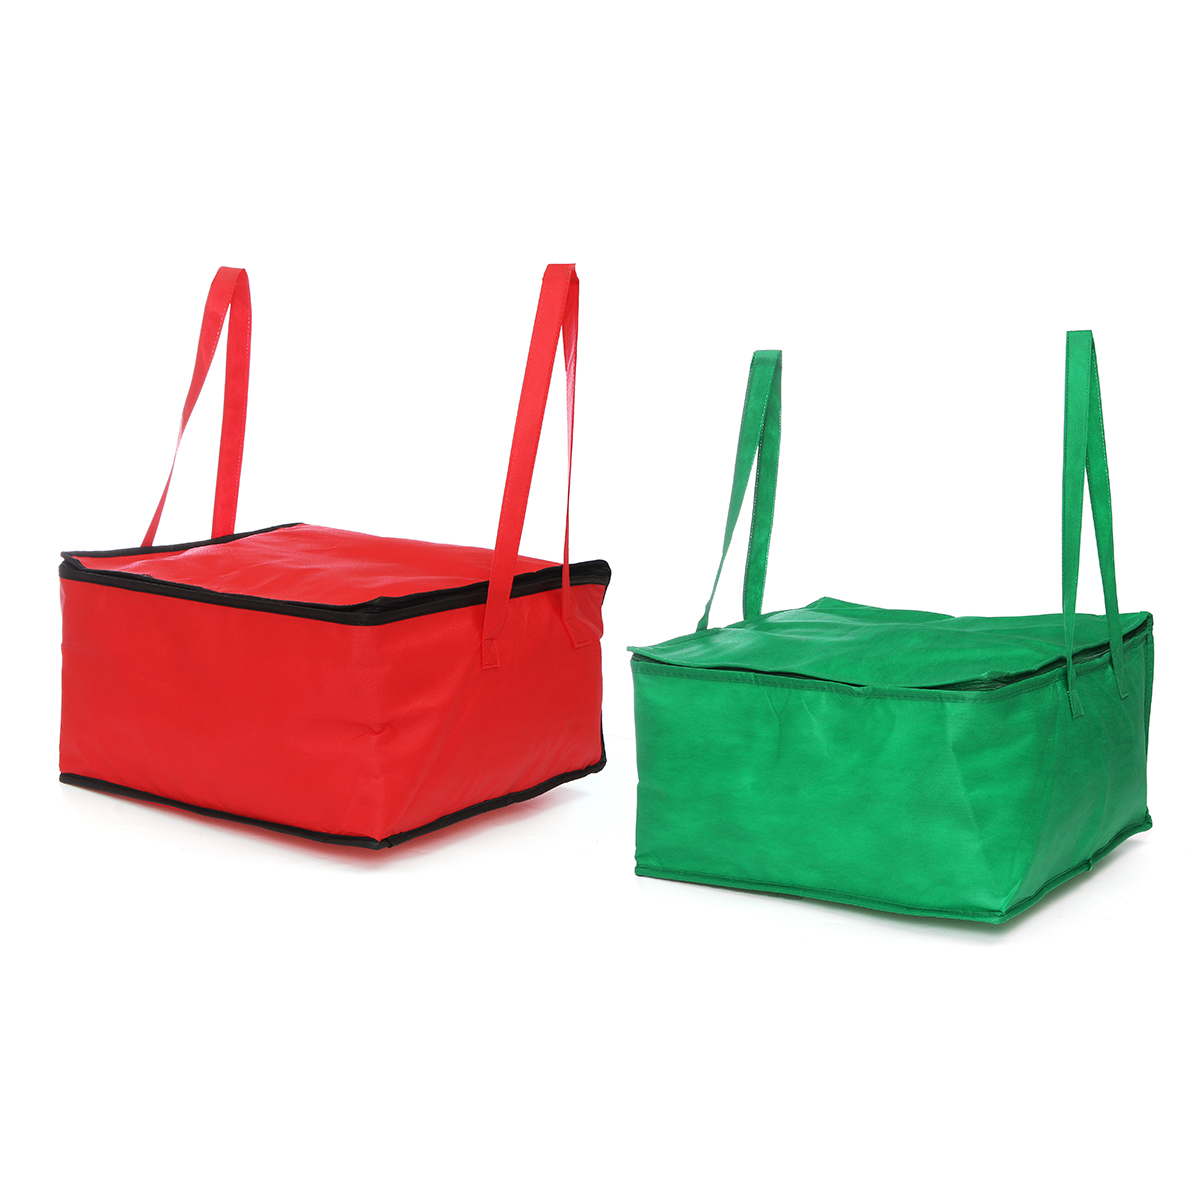 32L-Outdoor-Portable-Picnic-Bag-Insulated-Thermal-Cooler-Bag-Lunch-Food-Pizza-Storage-Bag-1554675-2